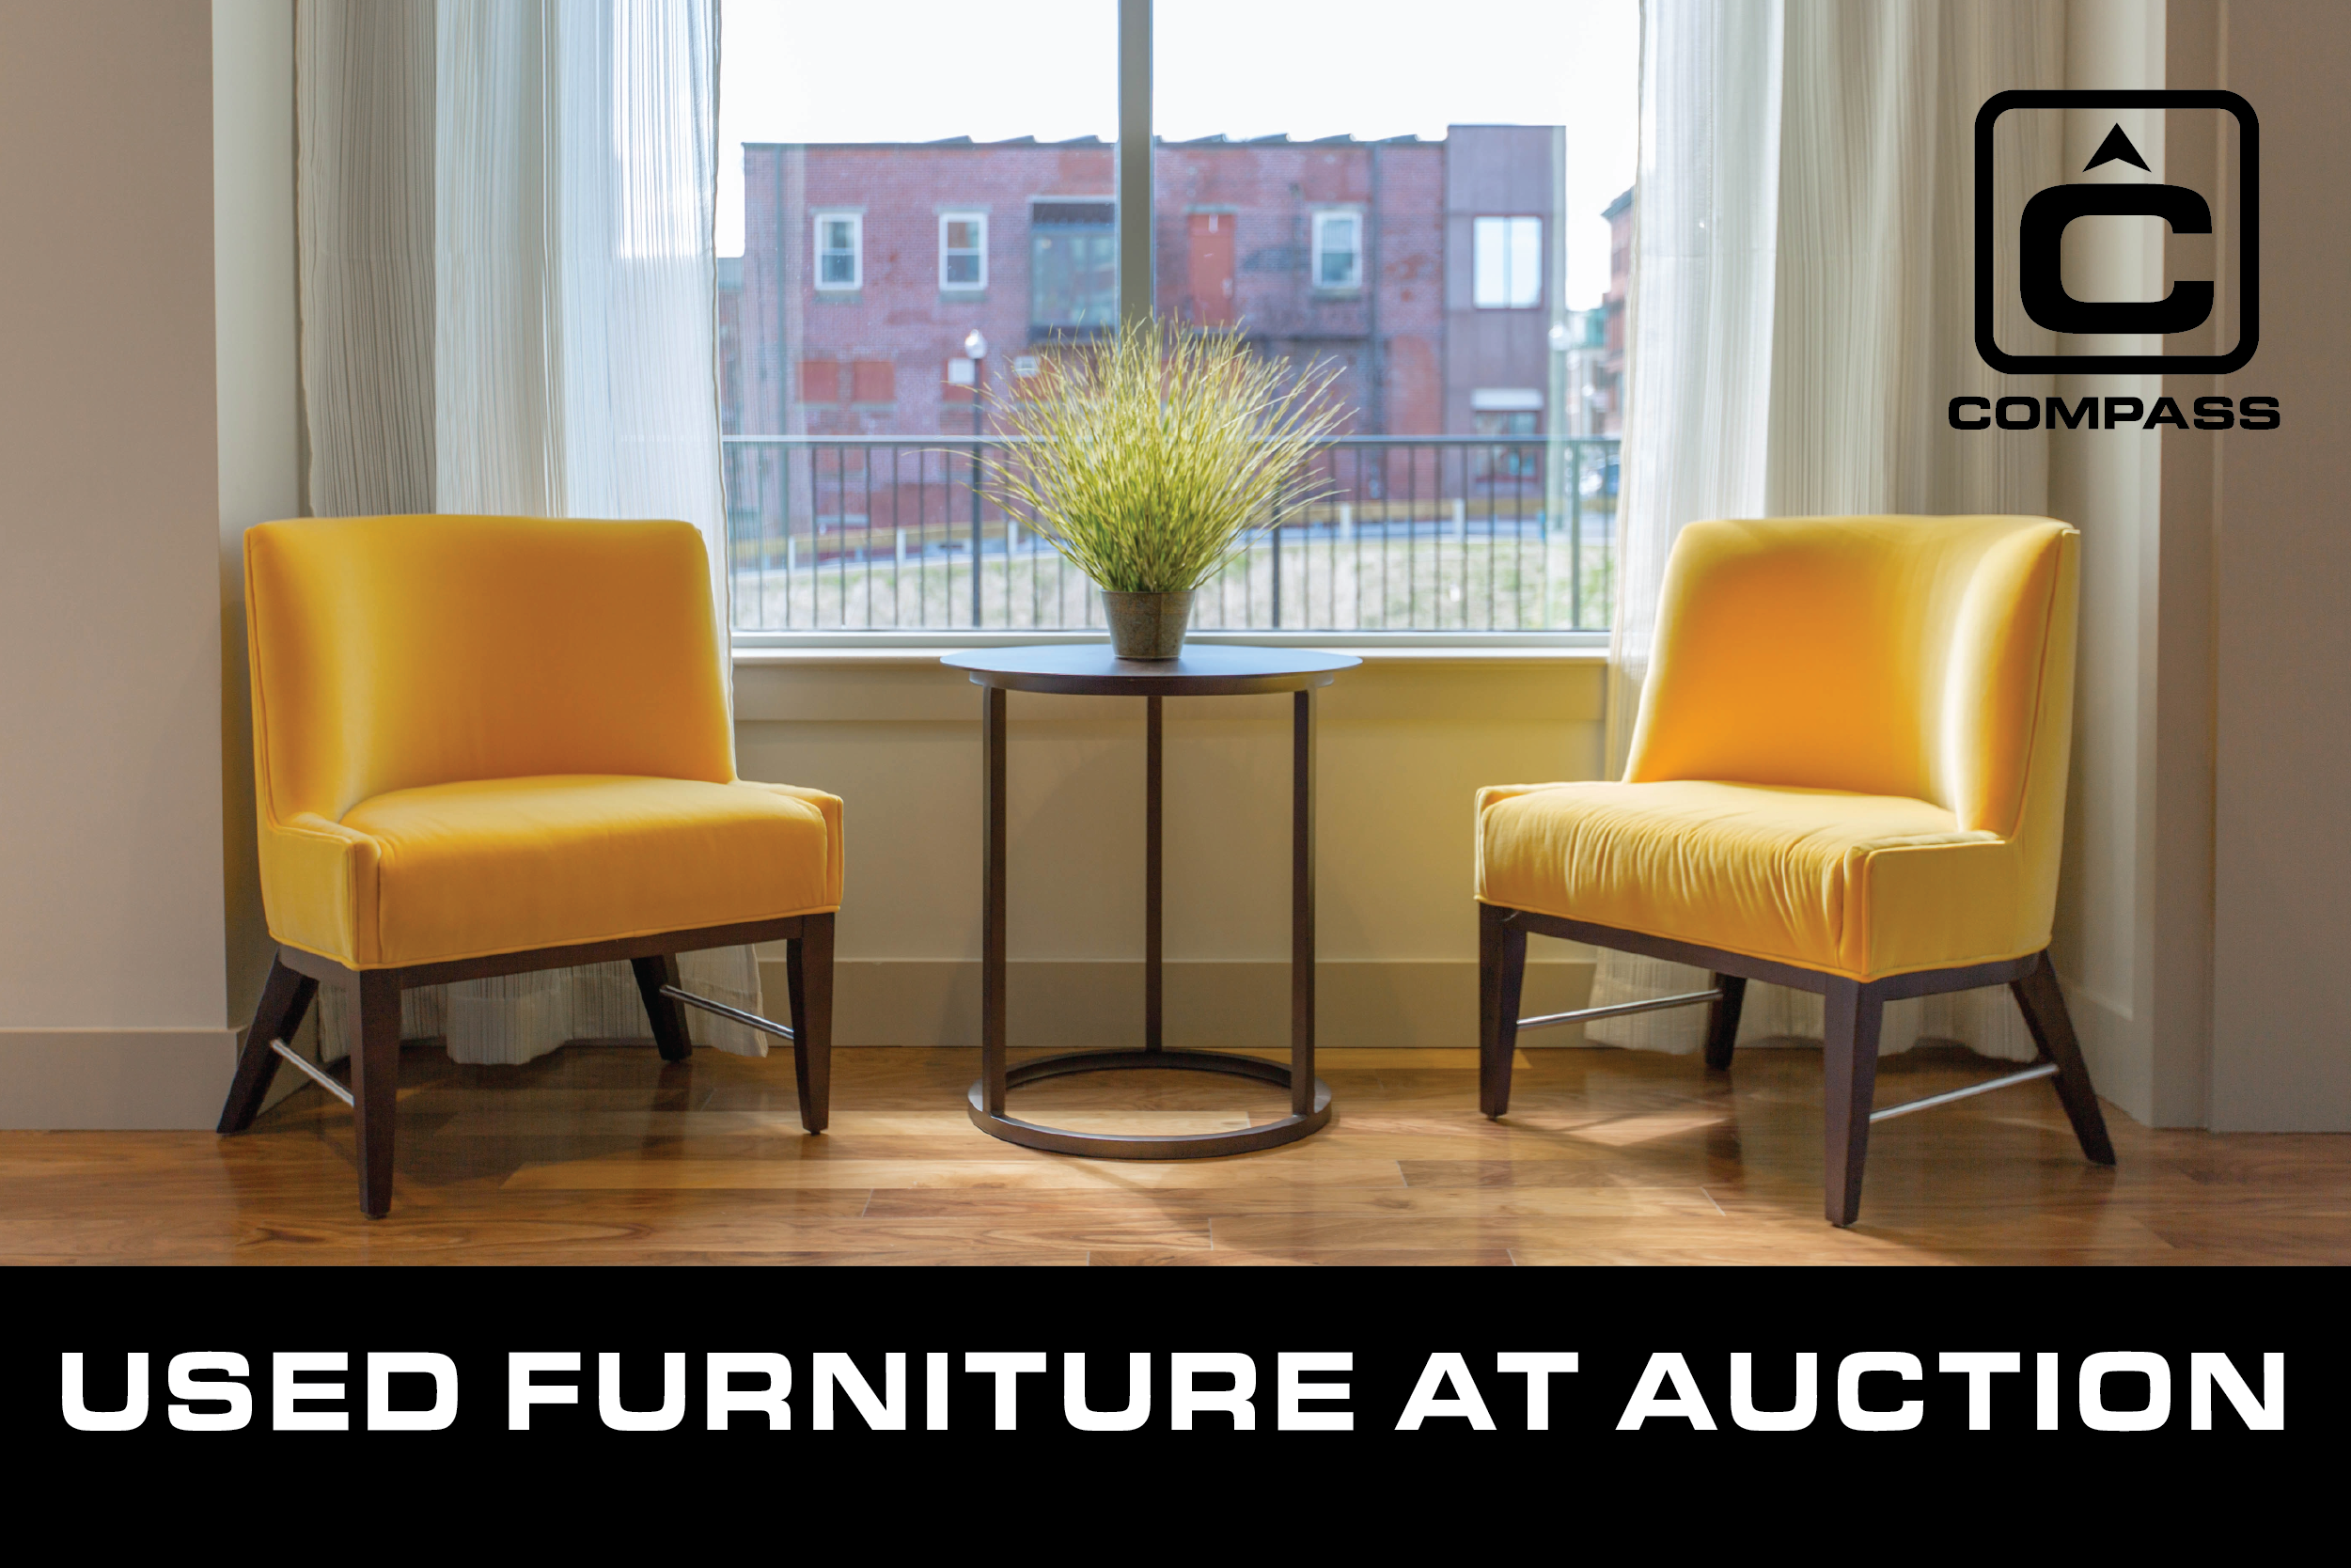 Used Furniture at Auction